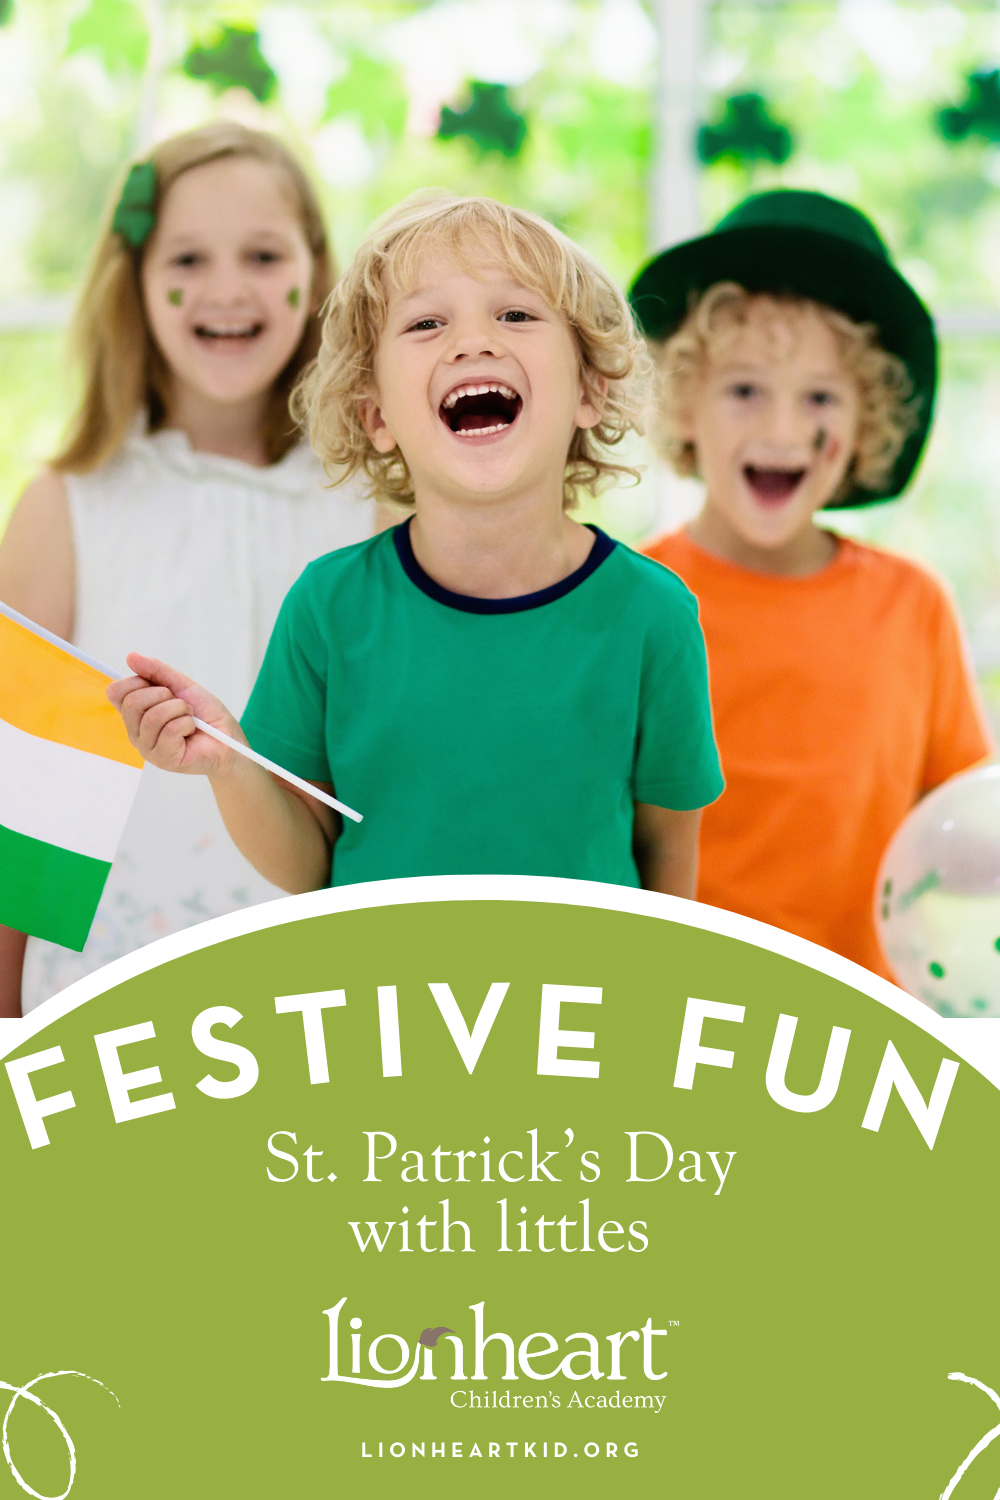 Image of three kids dressed in green in front of a shamrock garland and with an Irish flag to celebrate St. Patrick's Day!